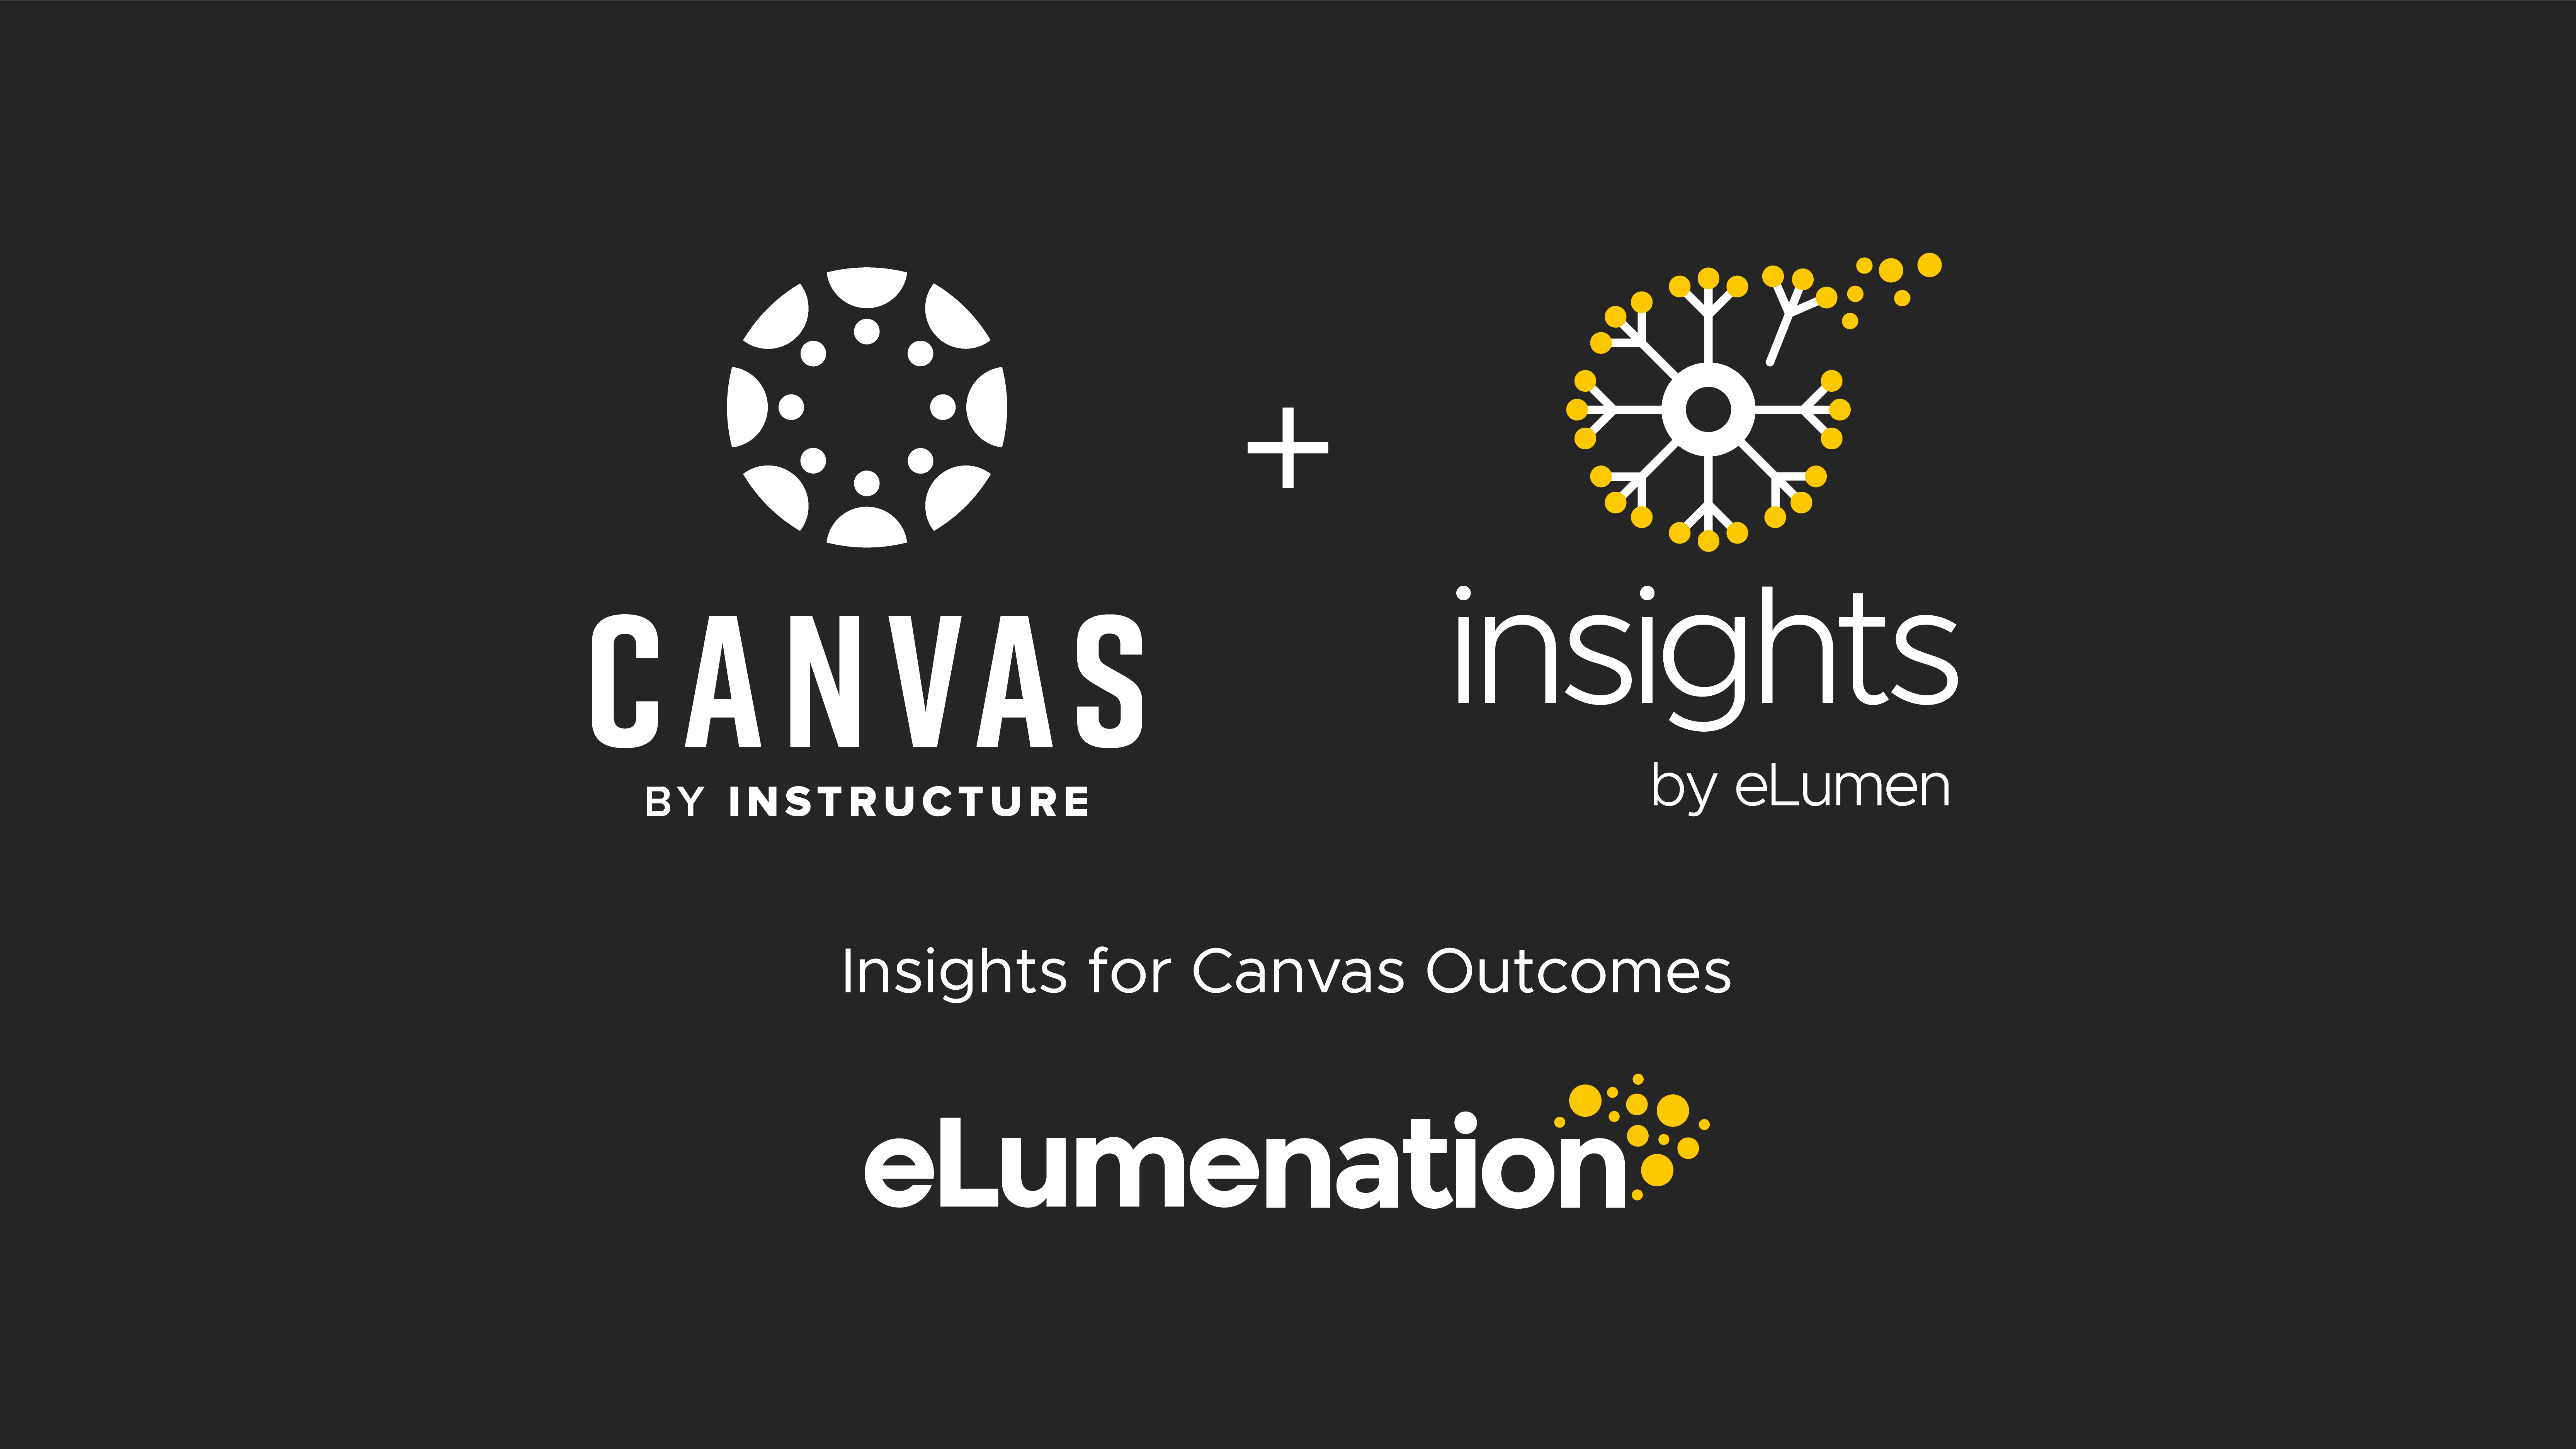 Insights for Canvas Outcomes to present at eLumenation